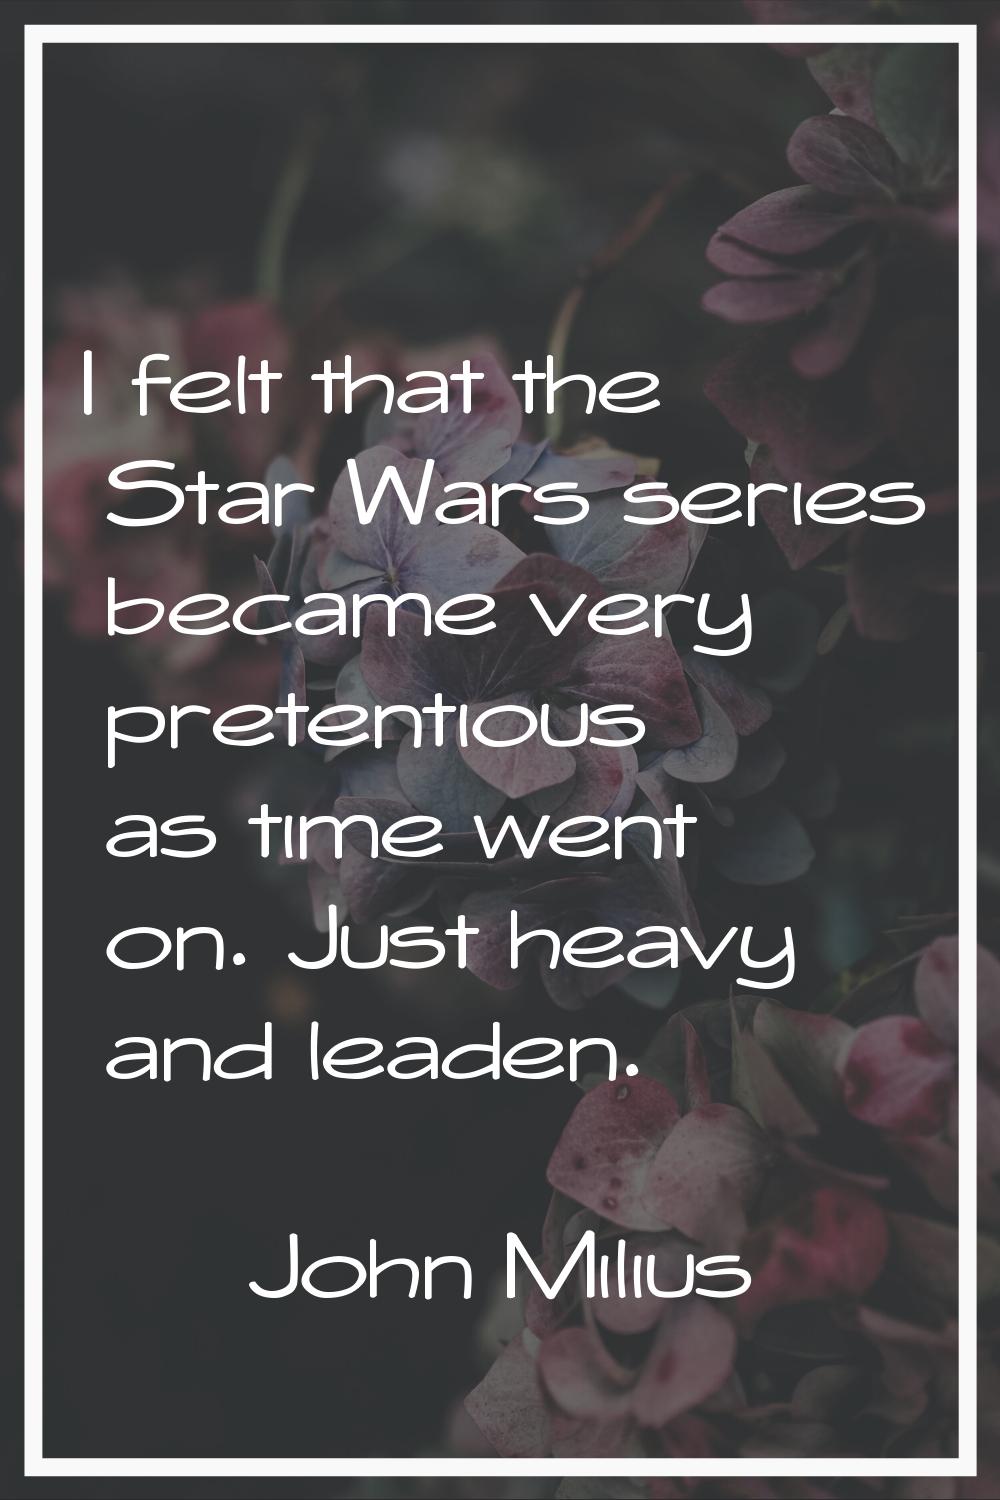 I felt that the Star Wars series became very pretentious as time went on. Just heavy and leaden.